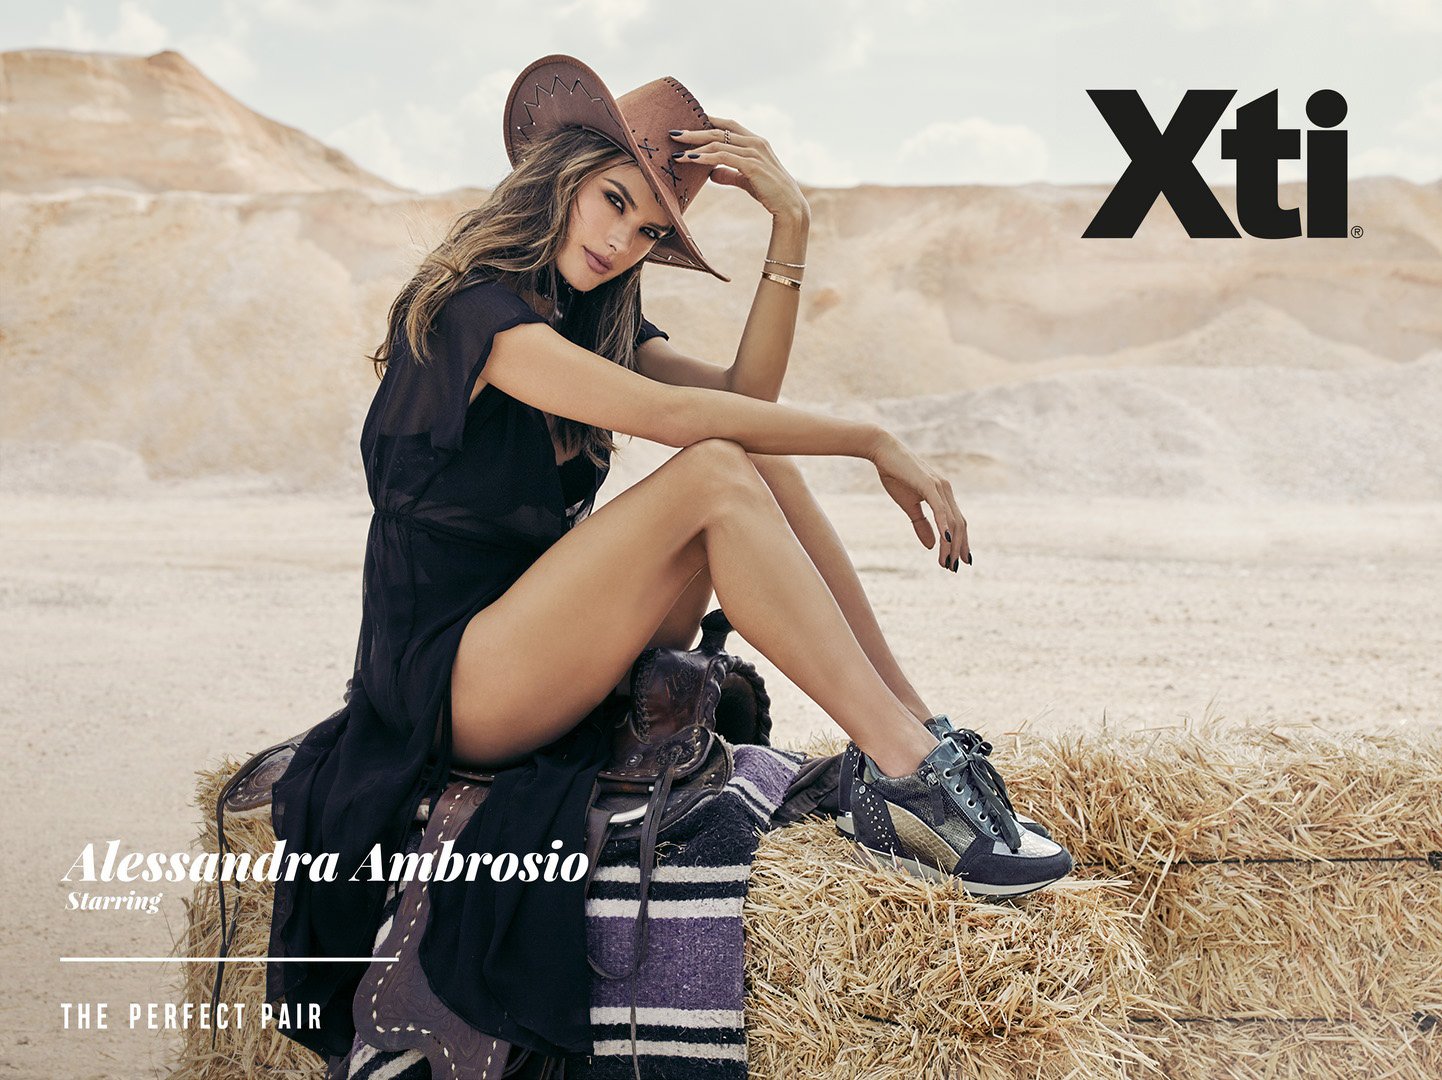 xti the perfect pair shoes